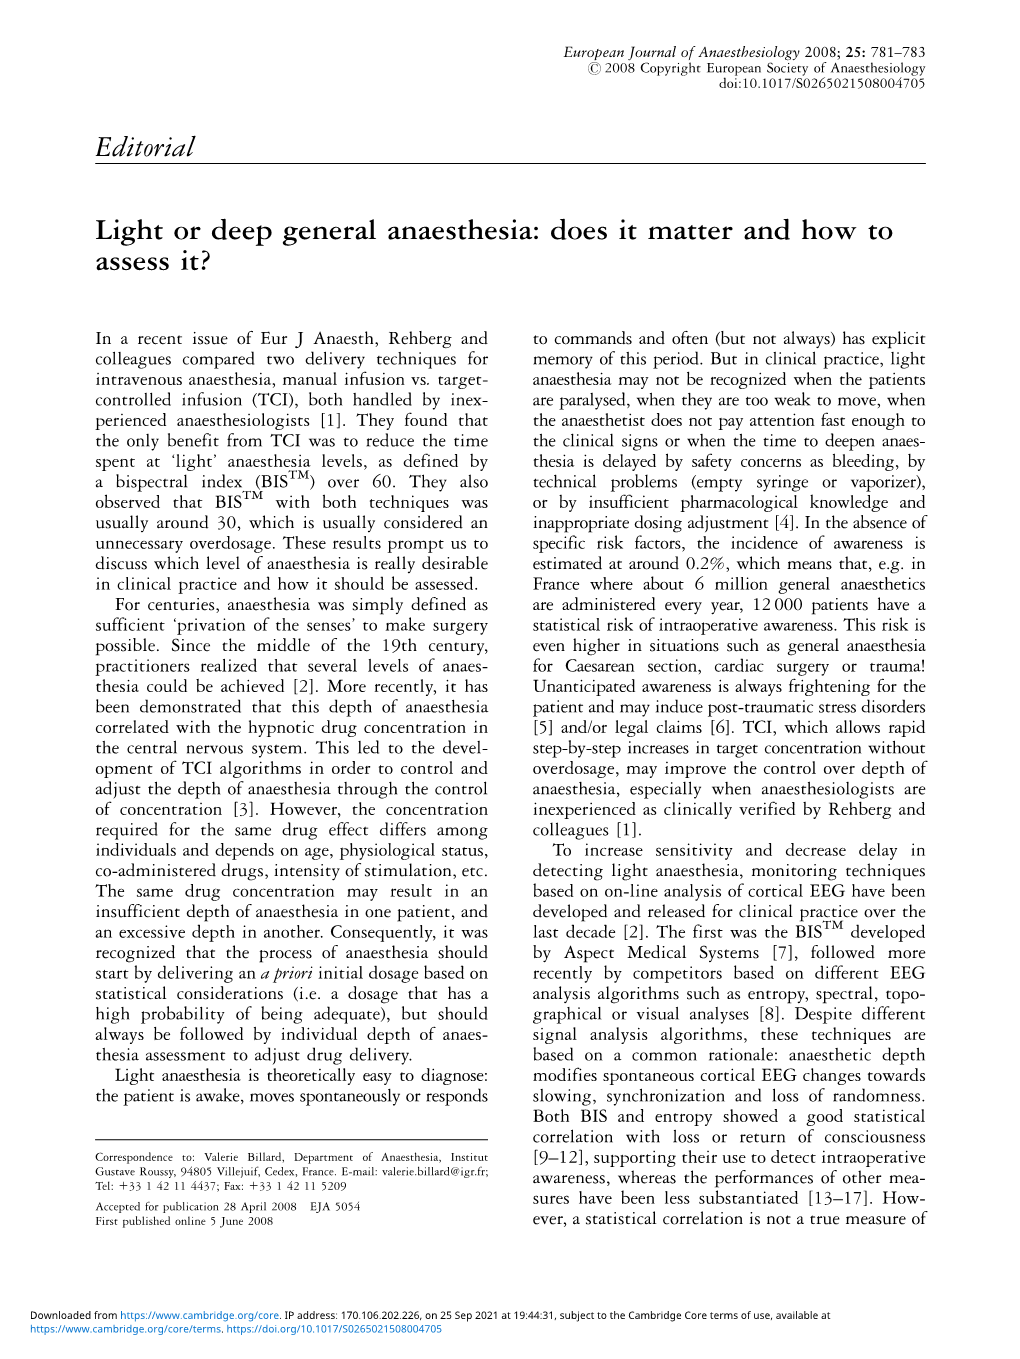 Light Or Deep General Anaesthesia: Does It Matter and How to Assess It?